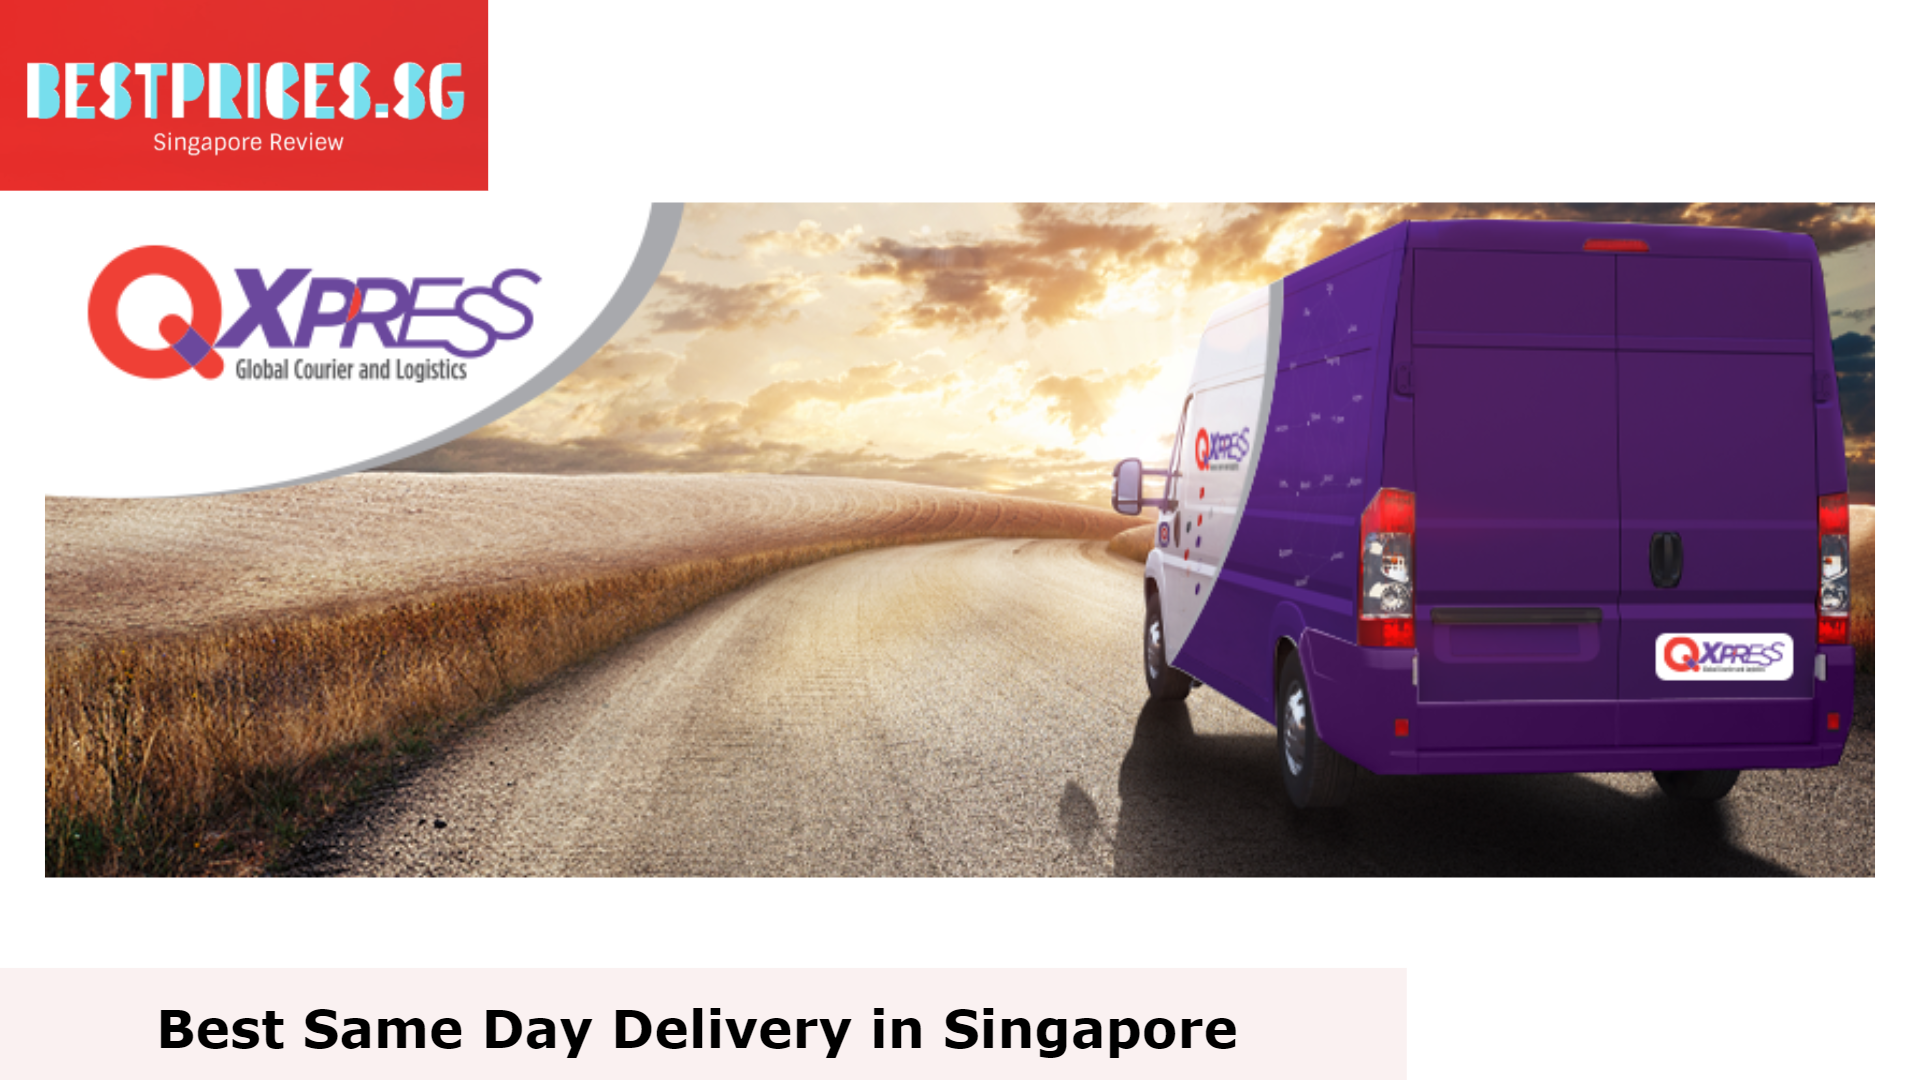 Qxpress - Best Same Day Delivery in Singapore, Same Day Delivery Singapore, Express Delivery in 1 hour, Same Day Delivery Courier Options In Singapore, Same-Day Delivery Gifts In Singapore, Best Courier Services in Singapore, Which delivery app is the cheapest Singapore?, Which courier service has lowest fees?, cheapest same day delivery singapore, same day delivery singapore gifts, same day delivery online shopping singapore, same day delivery singapore food, birthday gift same day delivery singapore, door to door delivery singapore, same day delivery singapore cake, same day delivery singapore flowers, 